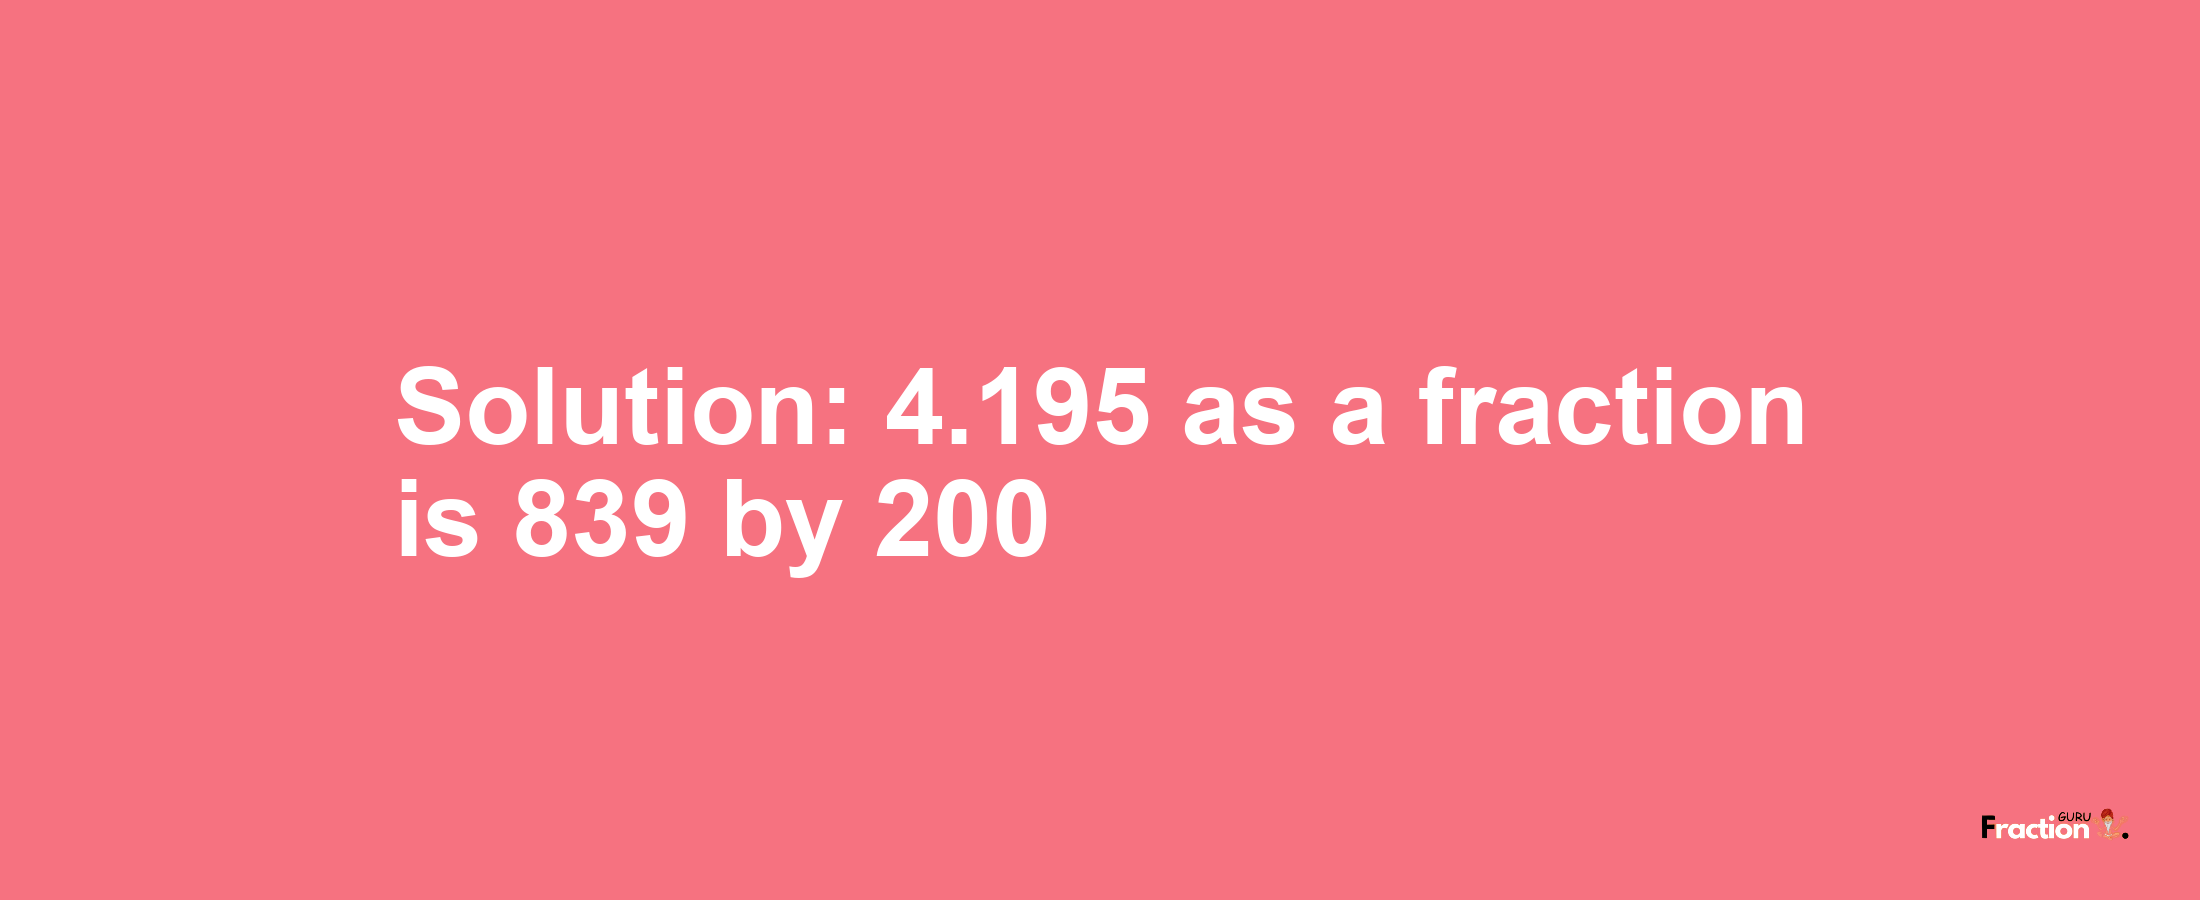 Solution:4.195 as a fraction is 839/200